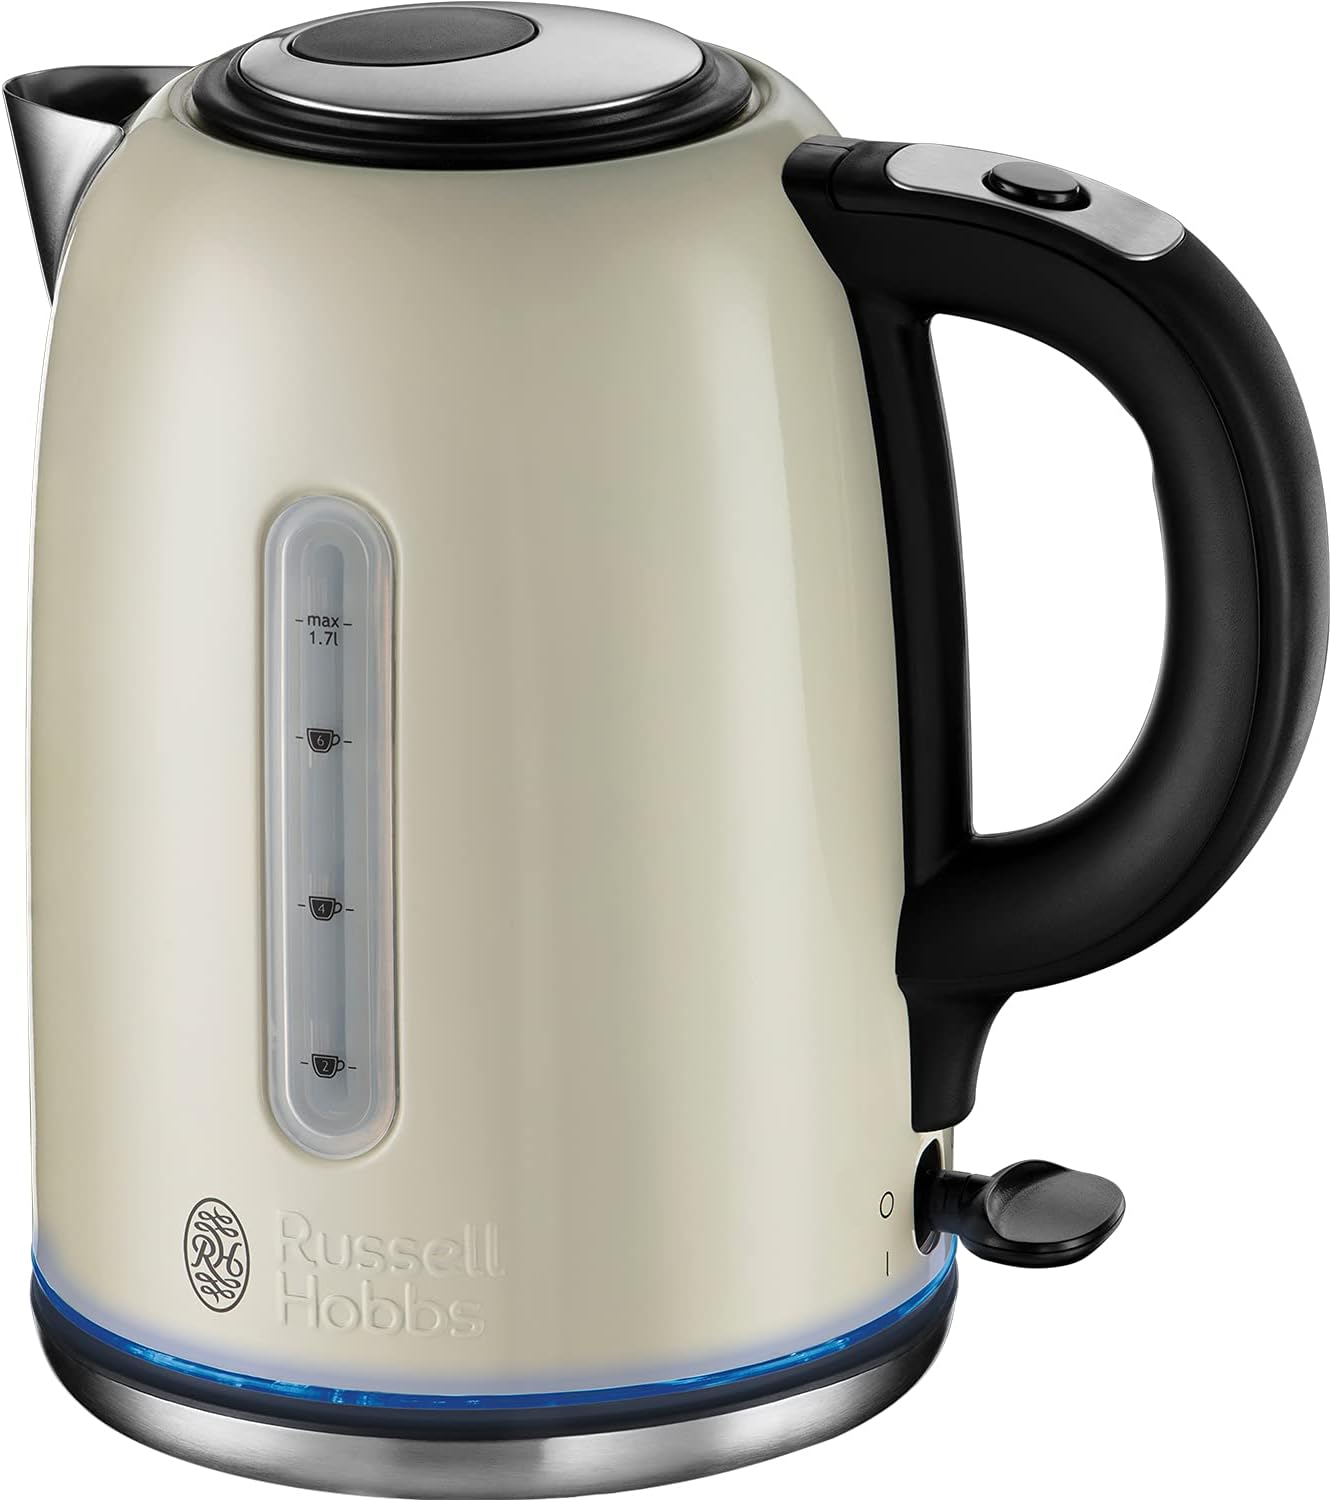 Russell Hobbs Cream Stainless Steel Electric 1.7L Cordless Kettle (Quiet & Fast Boil 3KW, Removable washable anti - scale filter, Push button lid, Perfect pour spout) 20461 - Amazing Gadgets Outlet